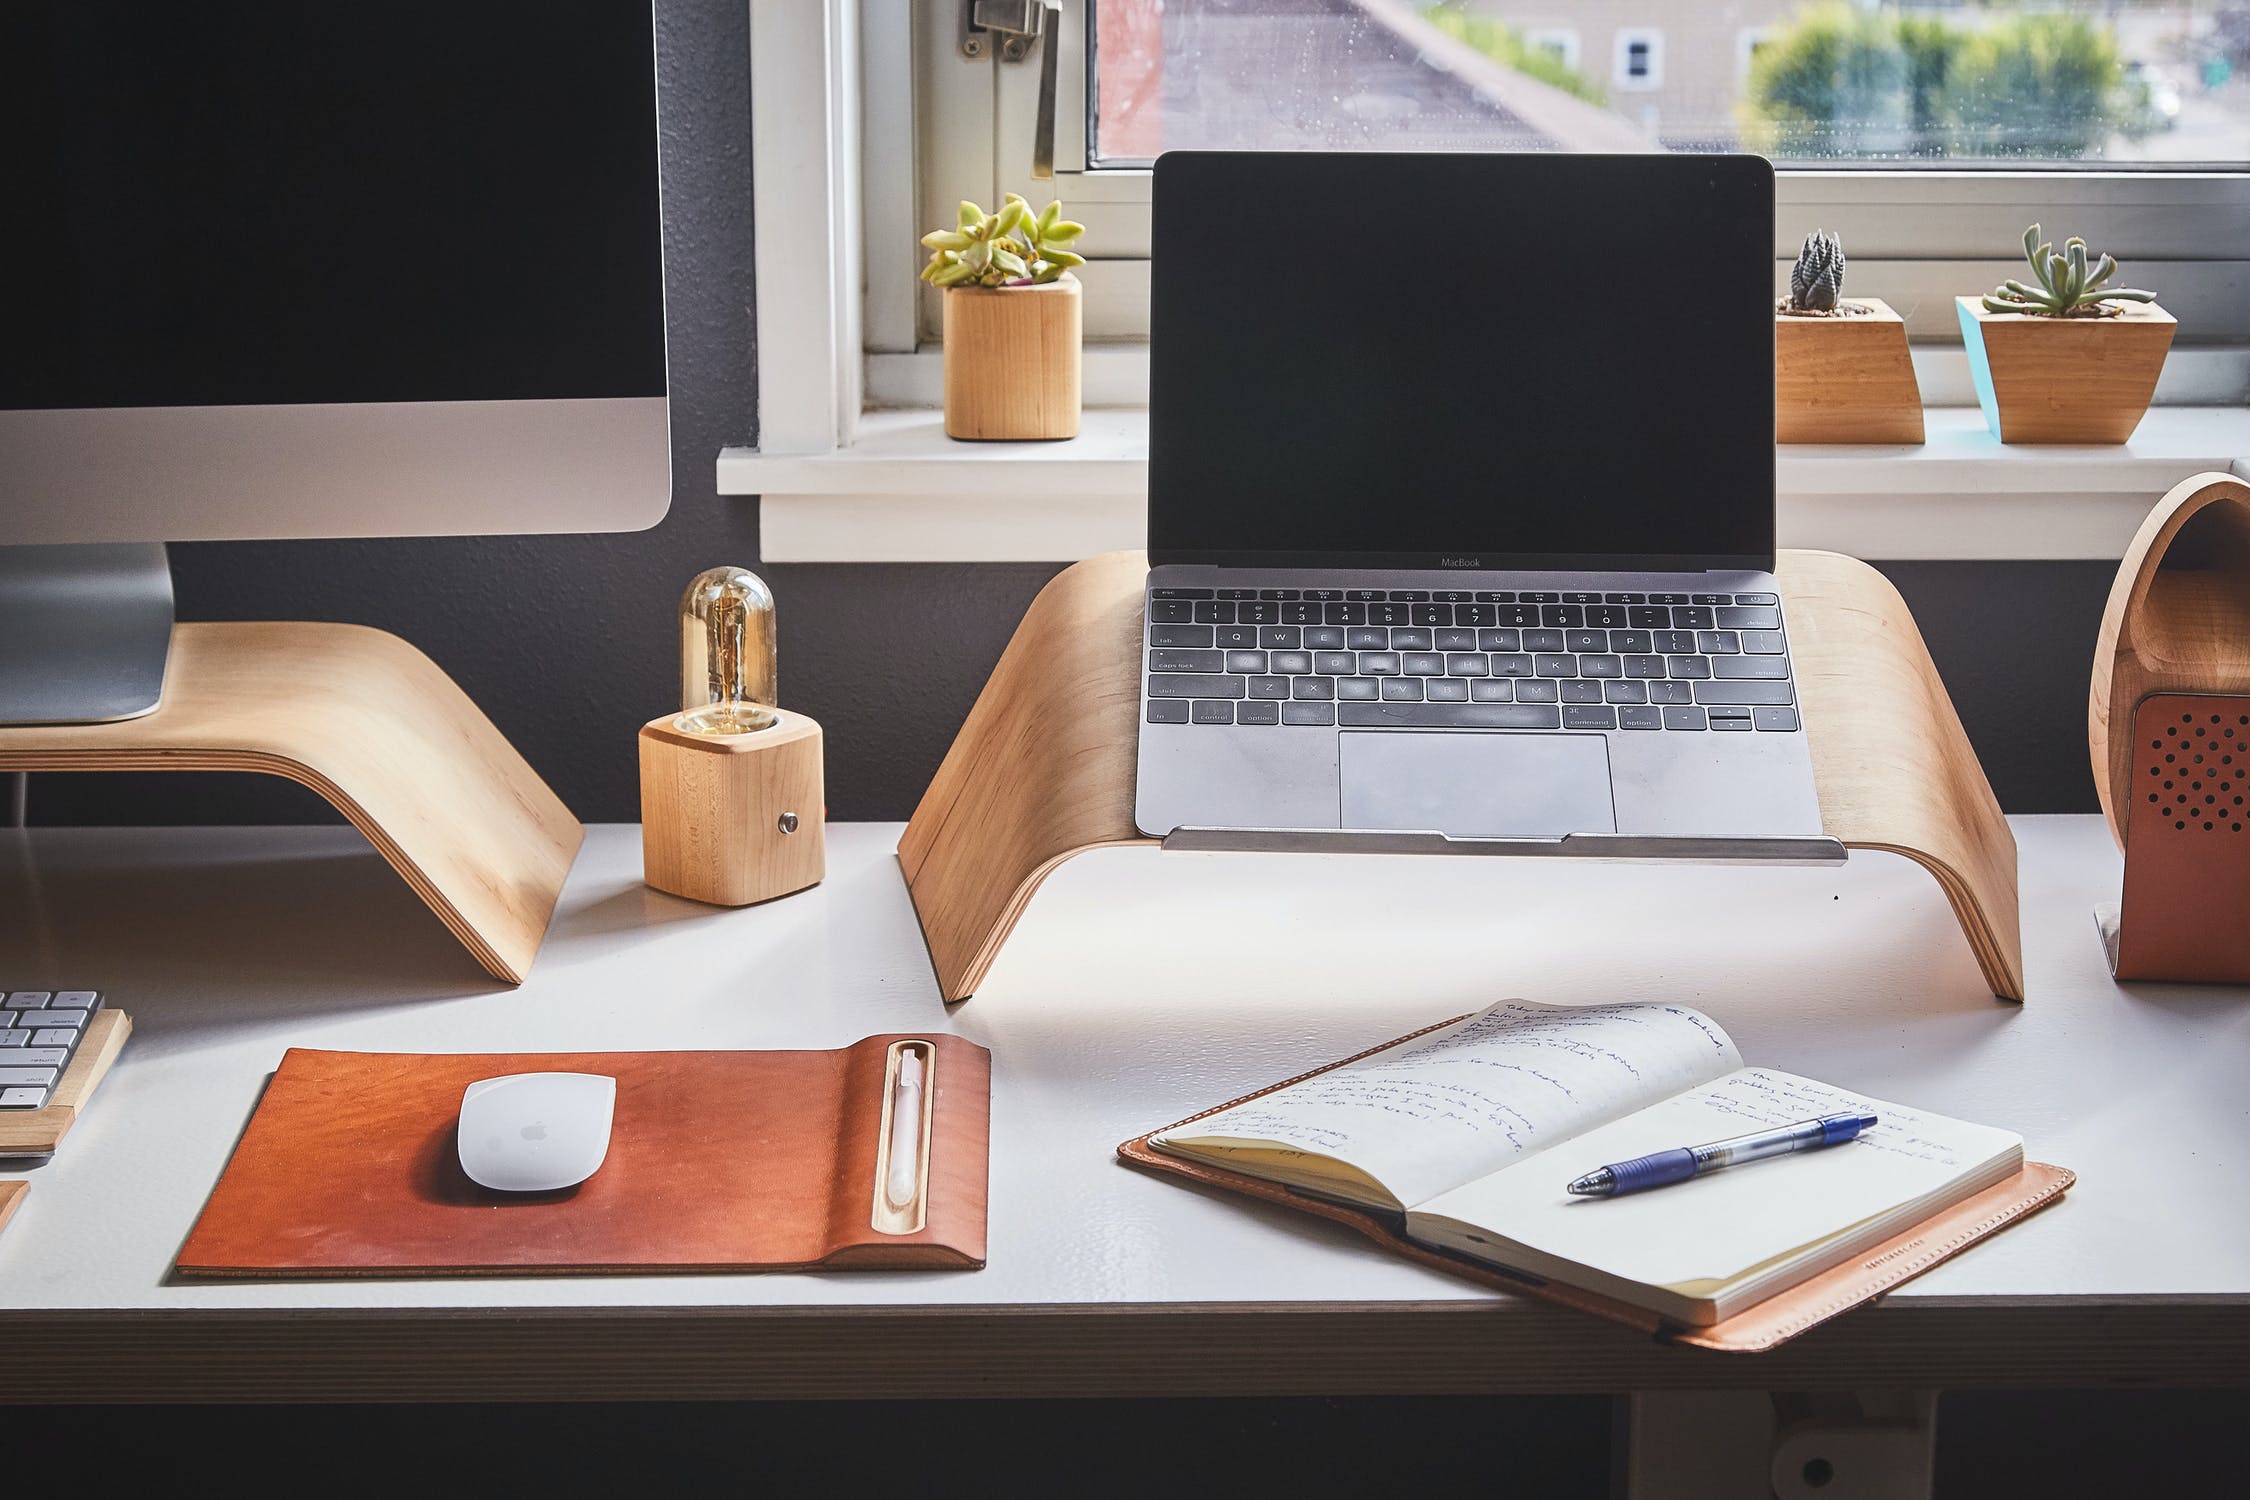 How to Make Your Home Office Look More Professional